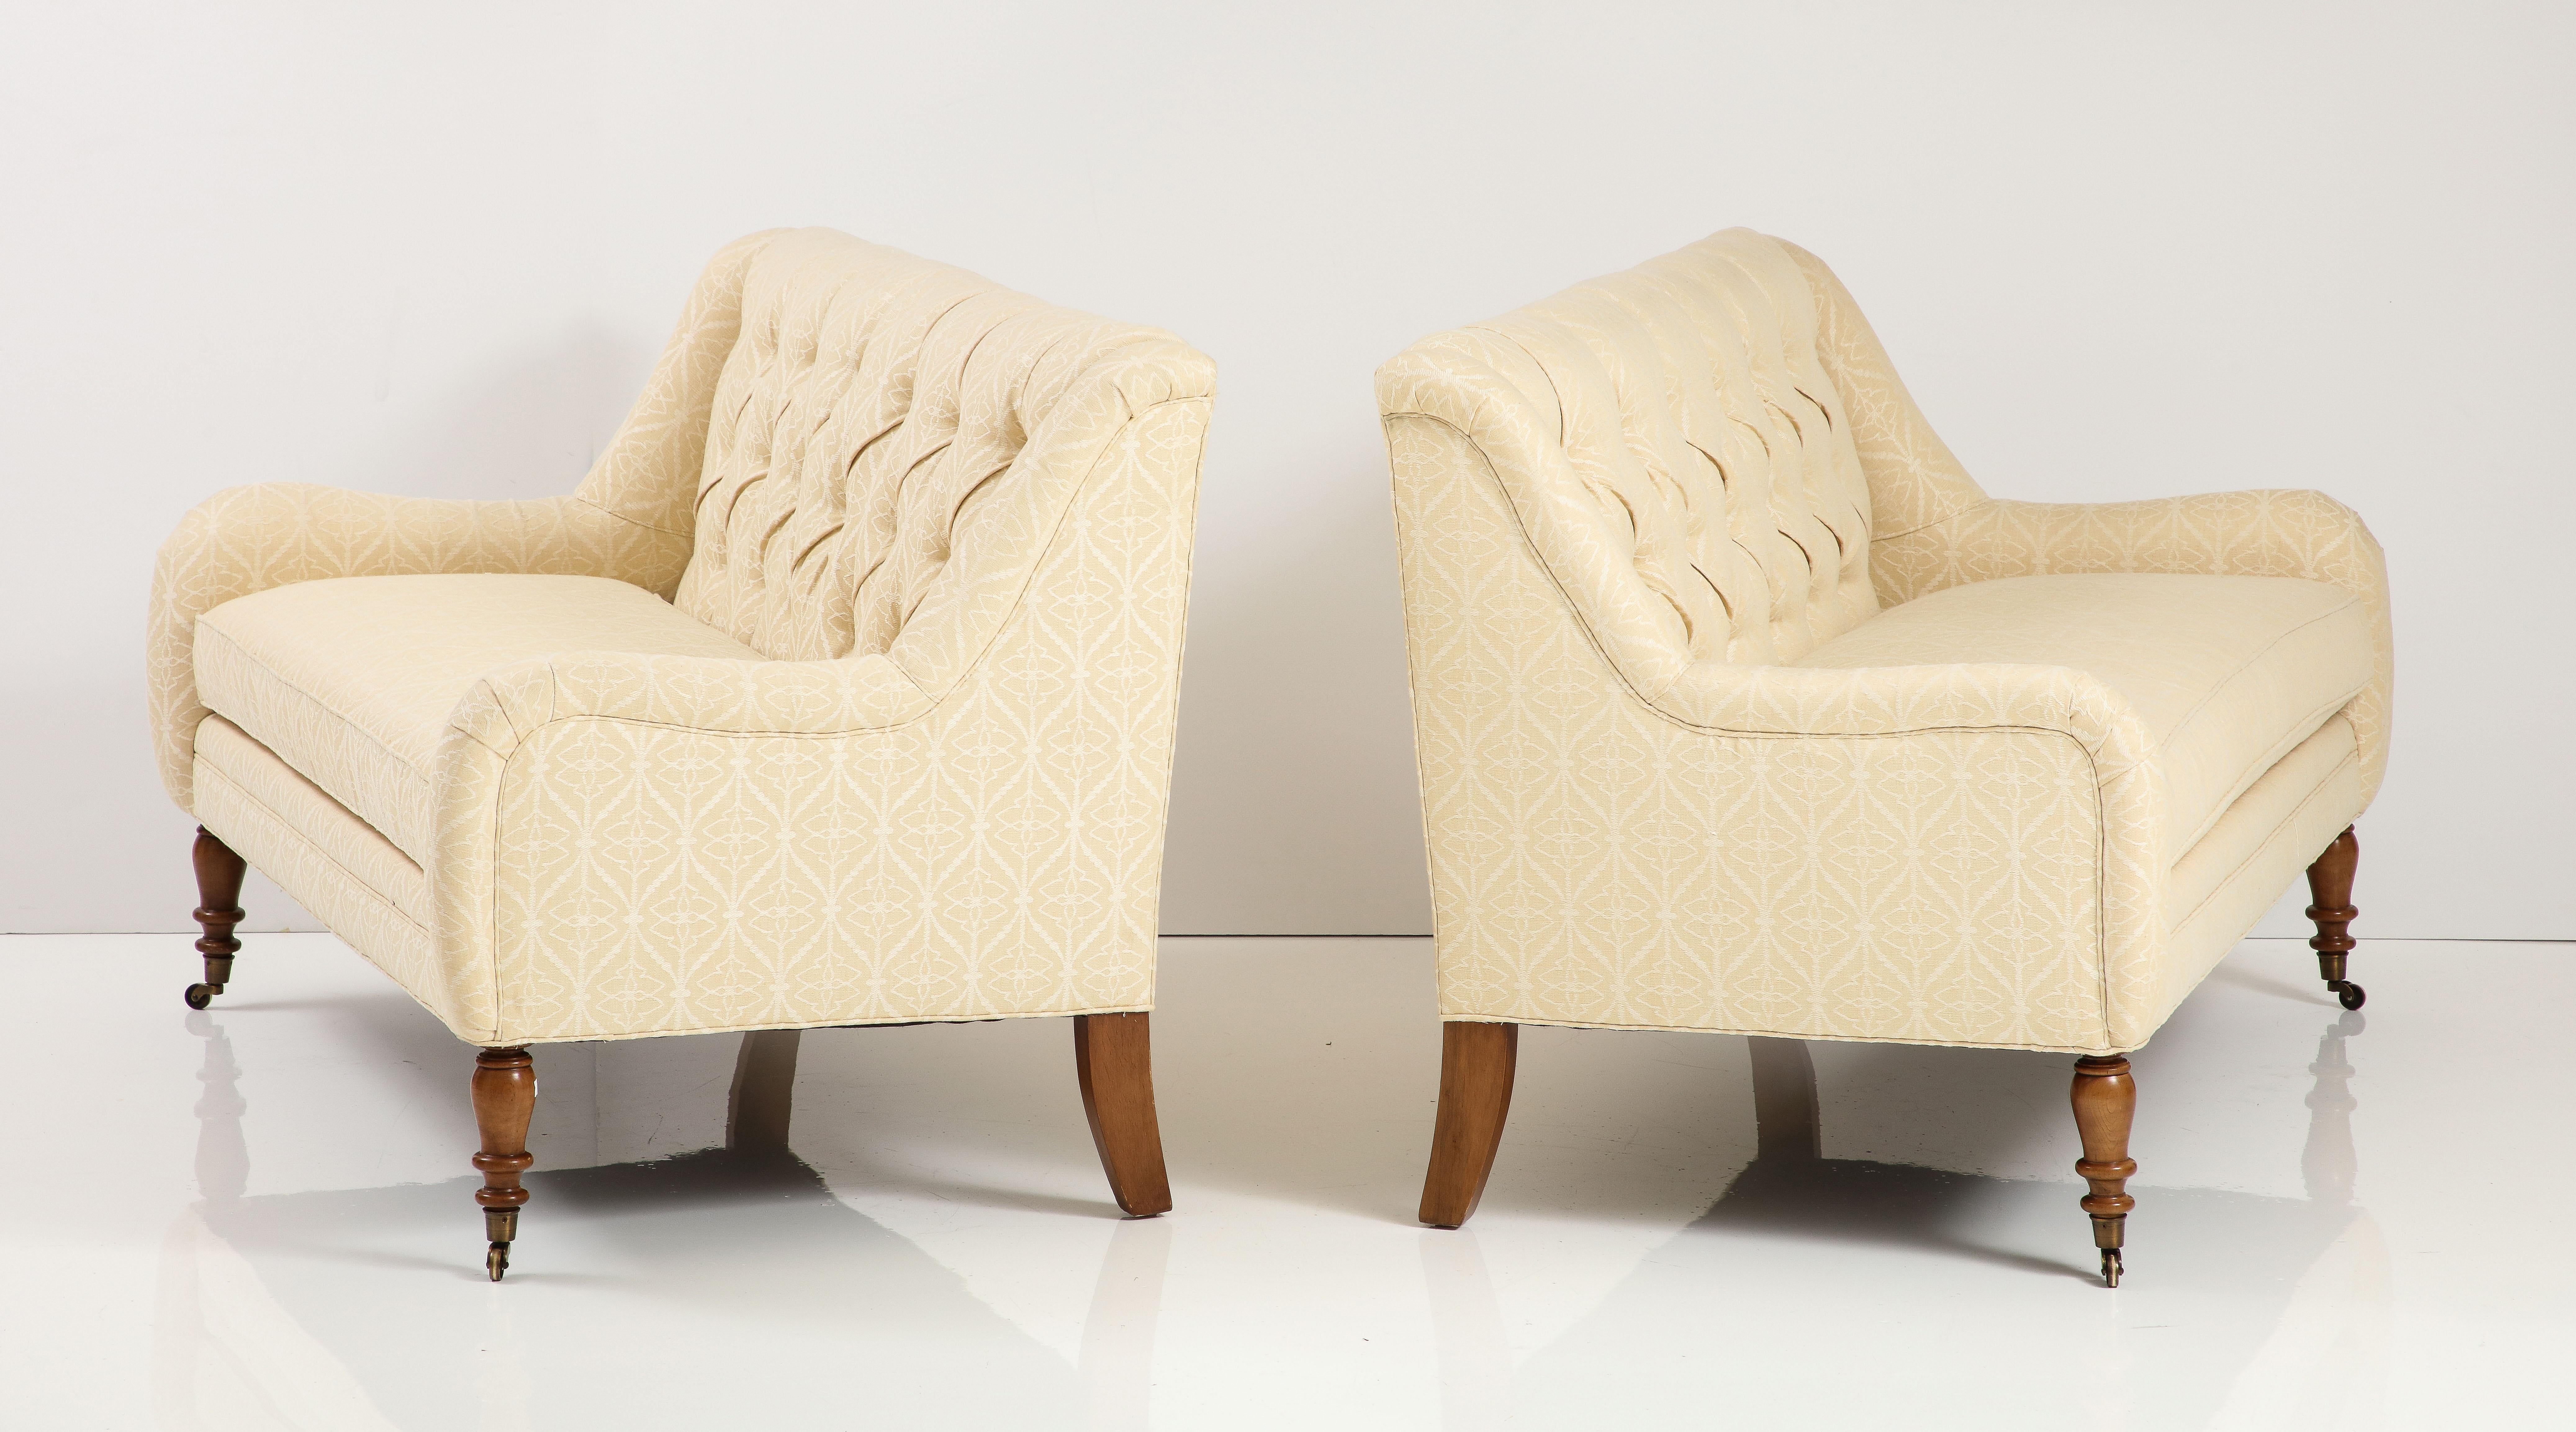 Contemporary Pair of Tufted Loveseats